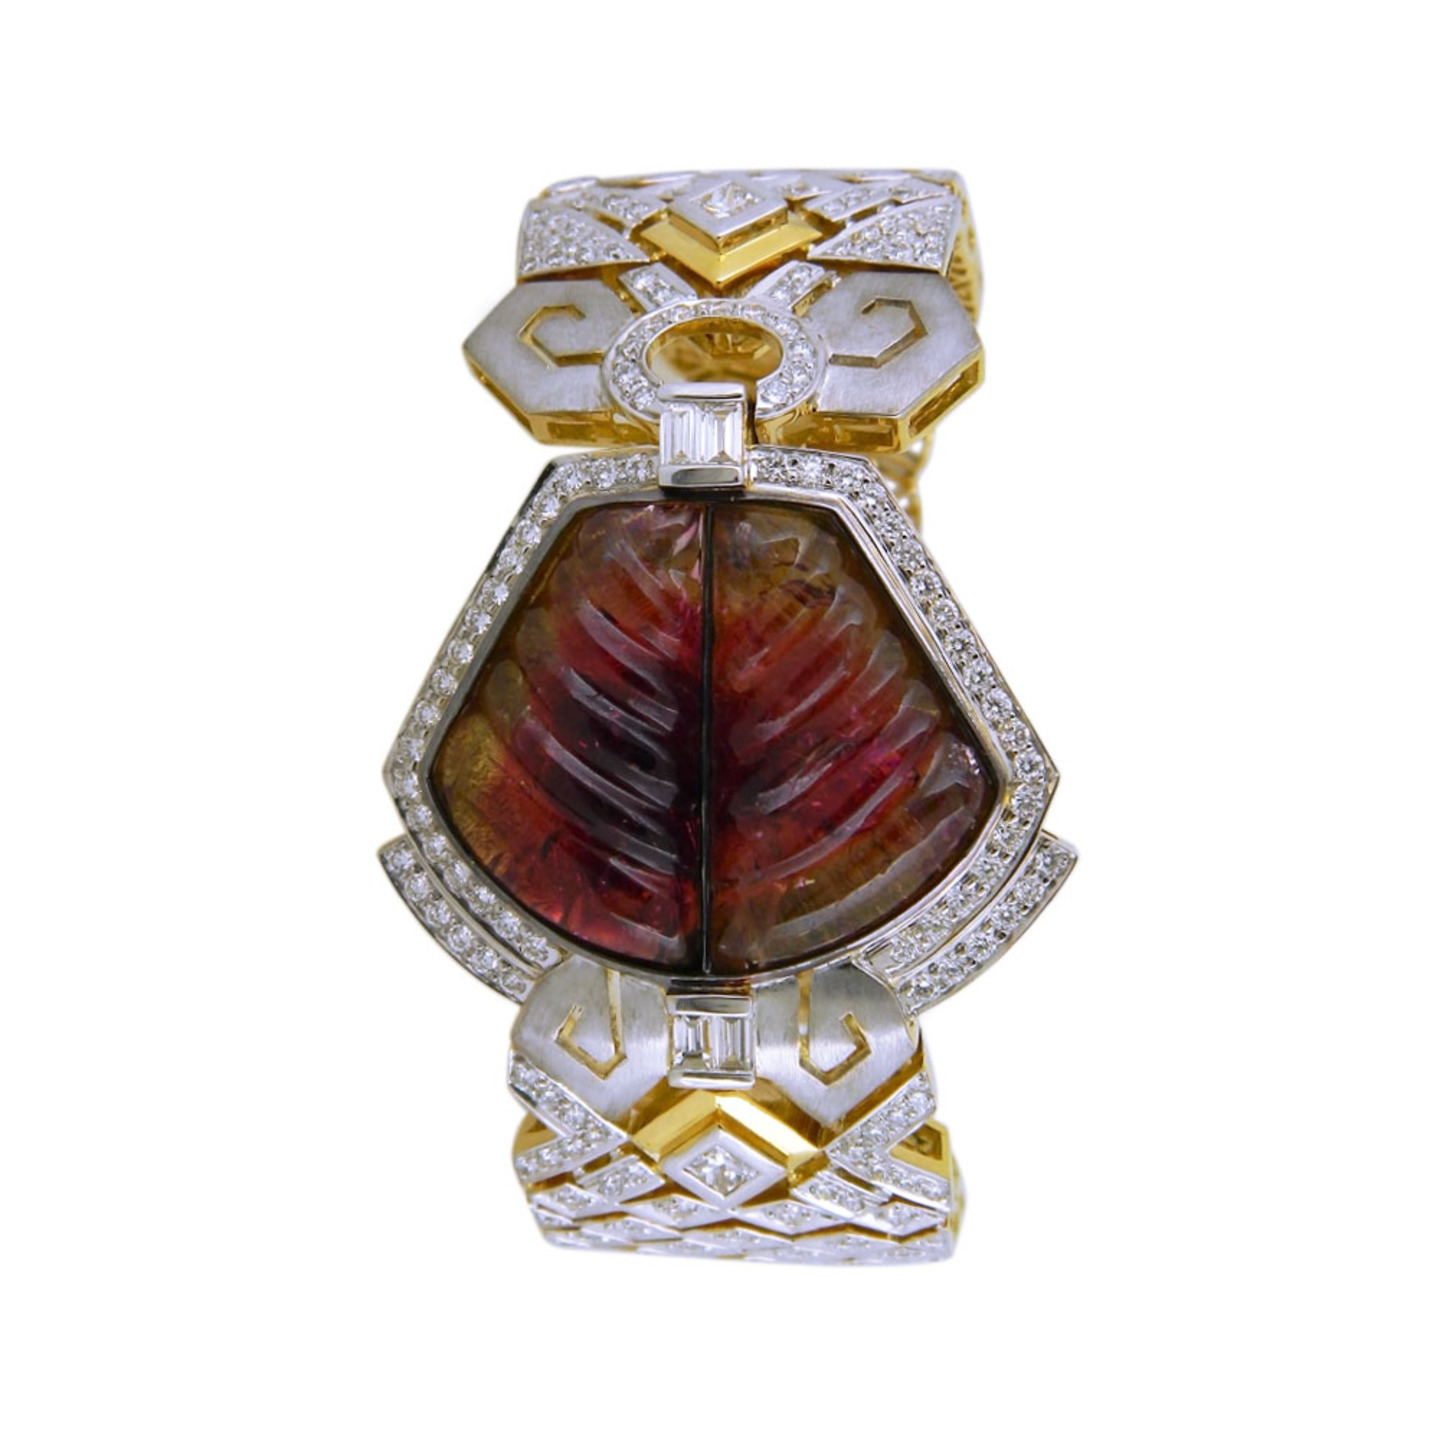 A broad diamond Tourmaline bracelet with geometric inspired filigree, in mix hues of gold